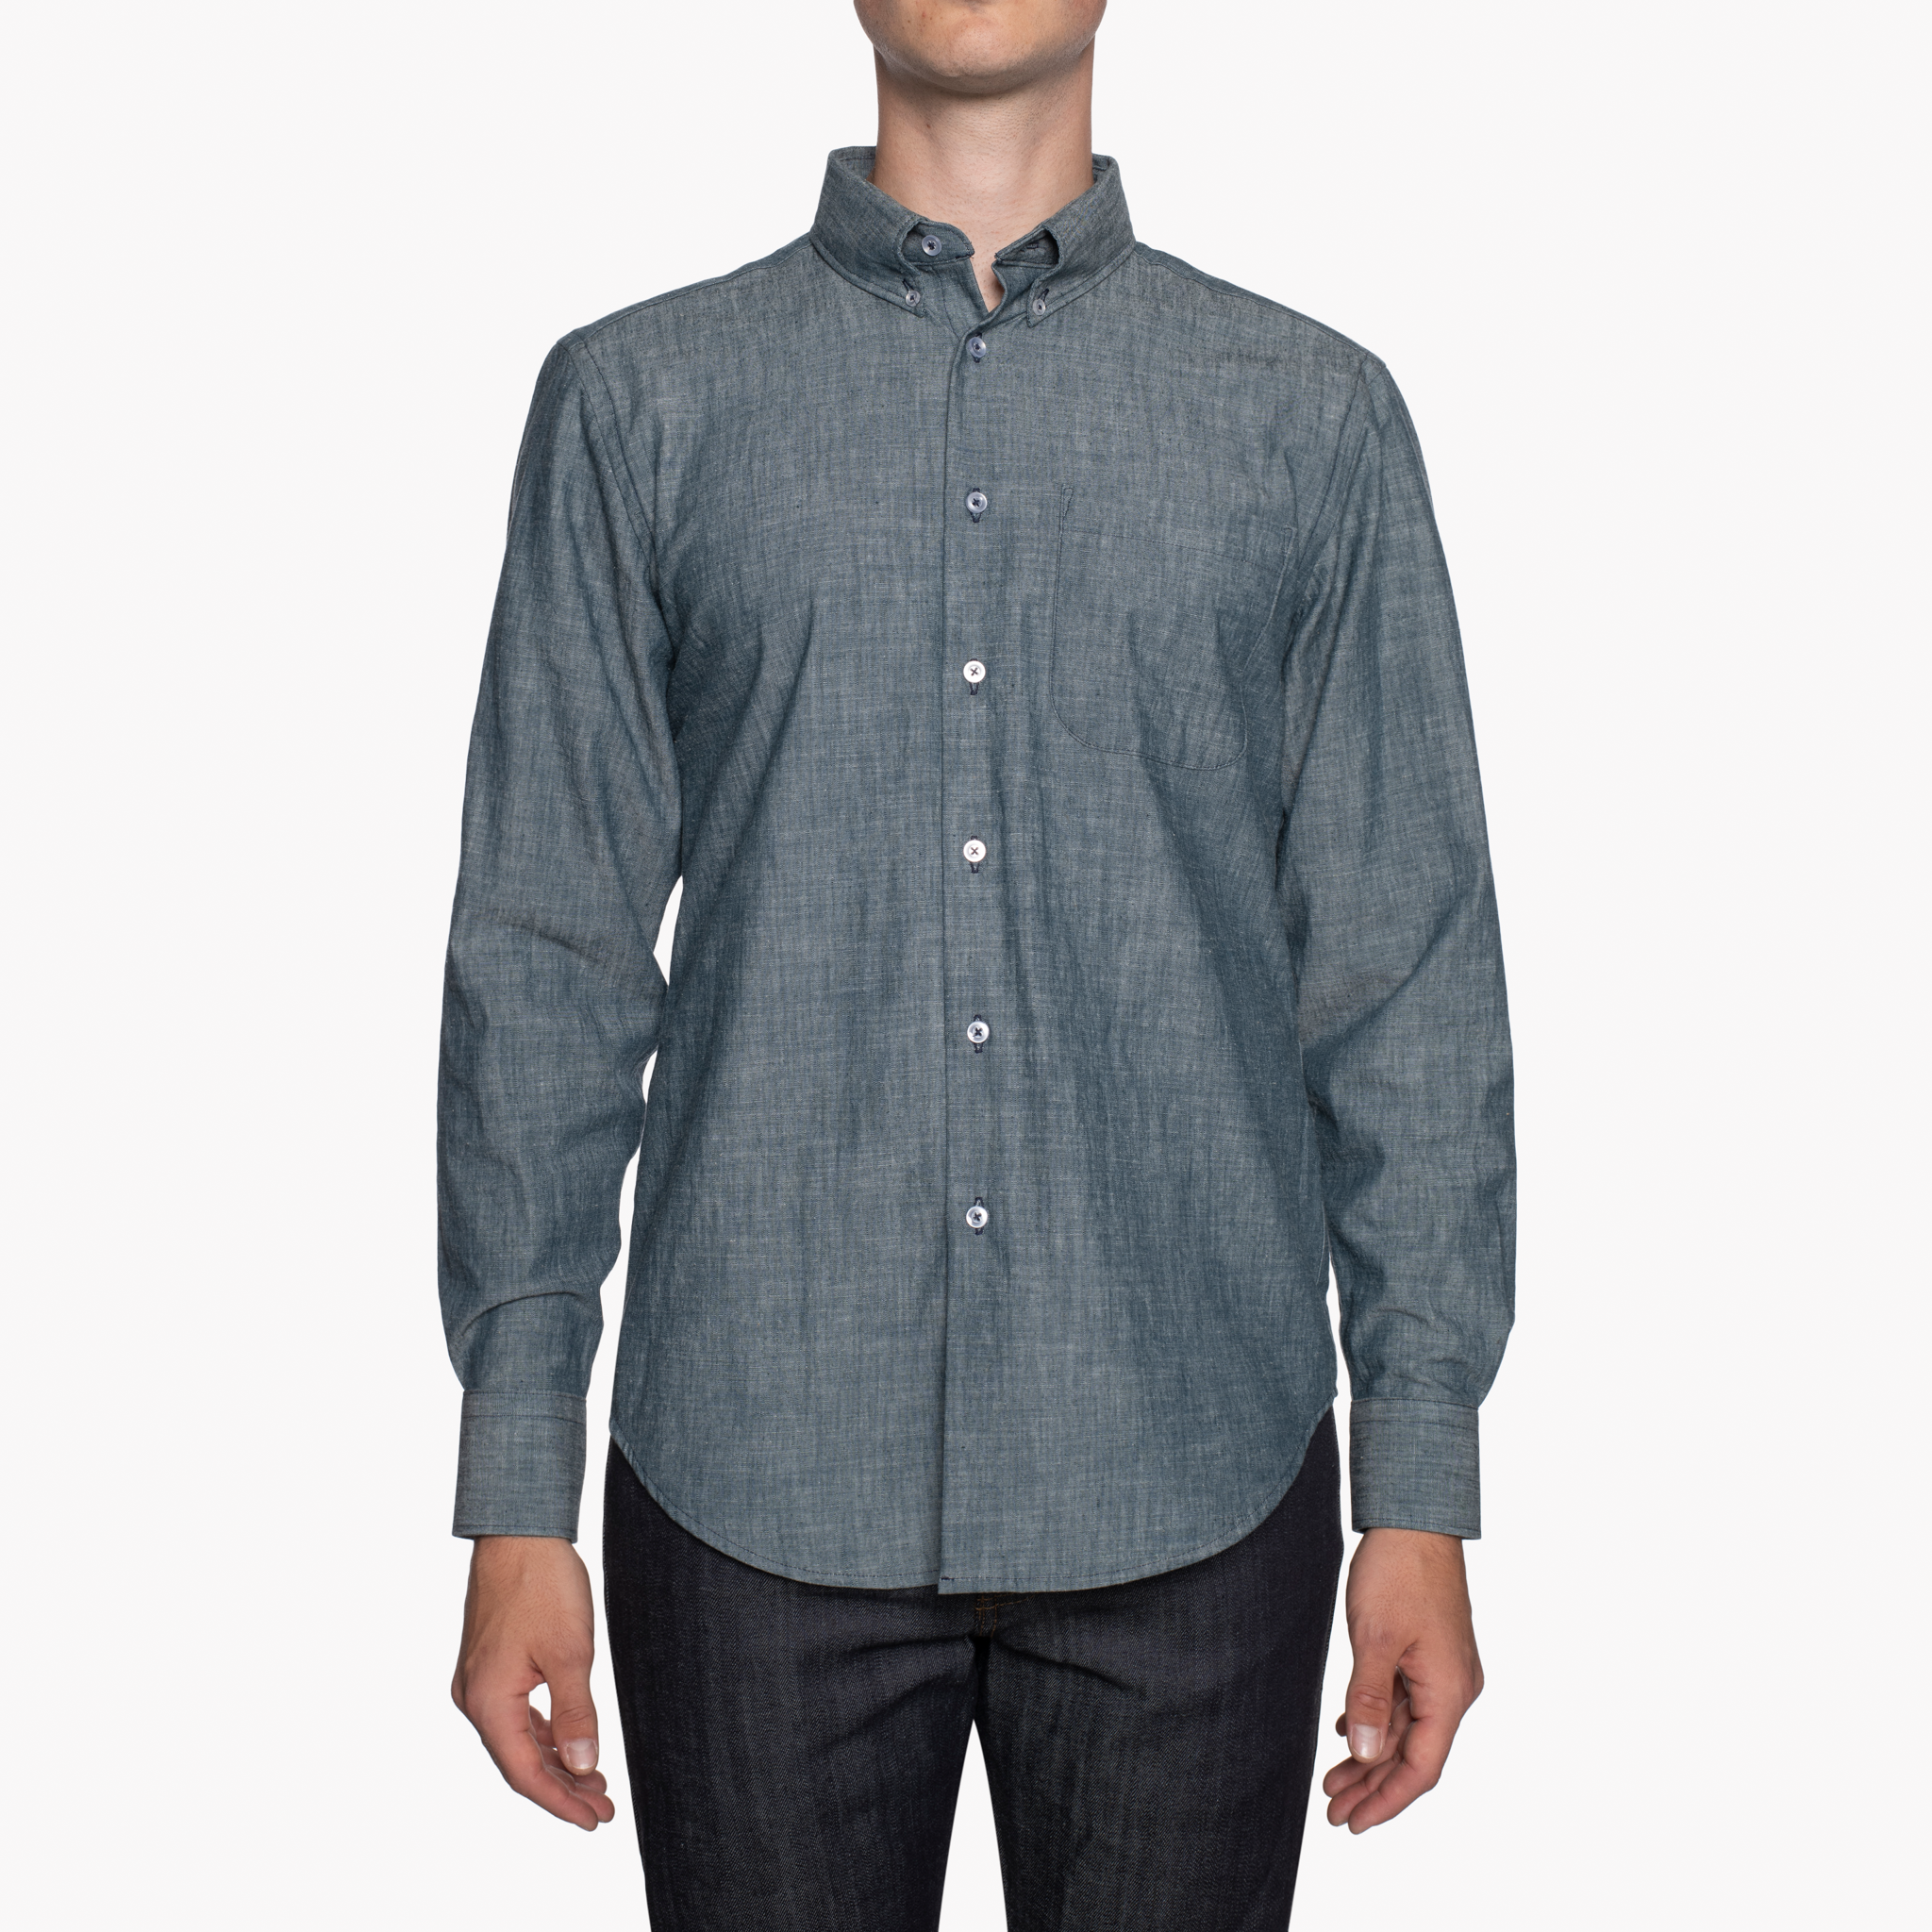  Easy Shirt - 5oz Rinsed Chambray - front 